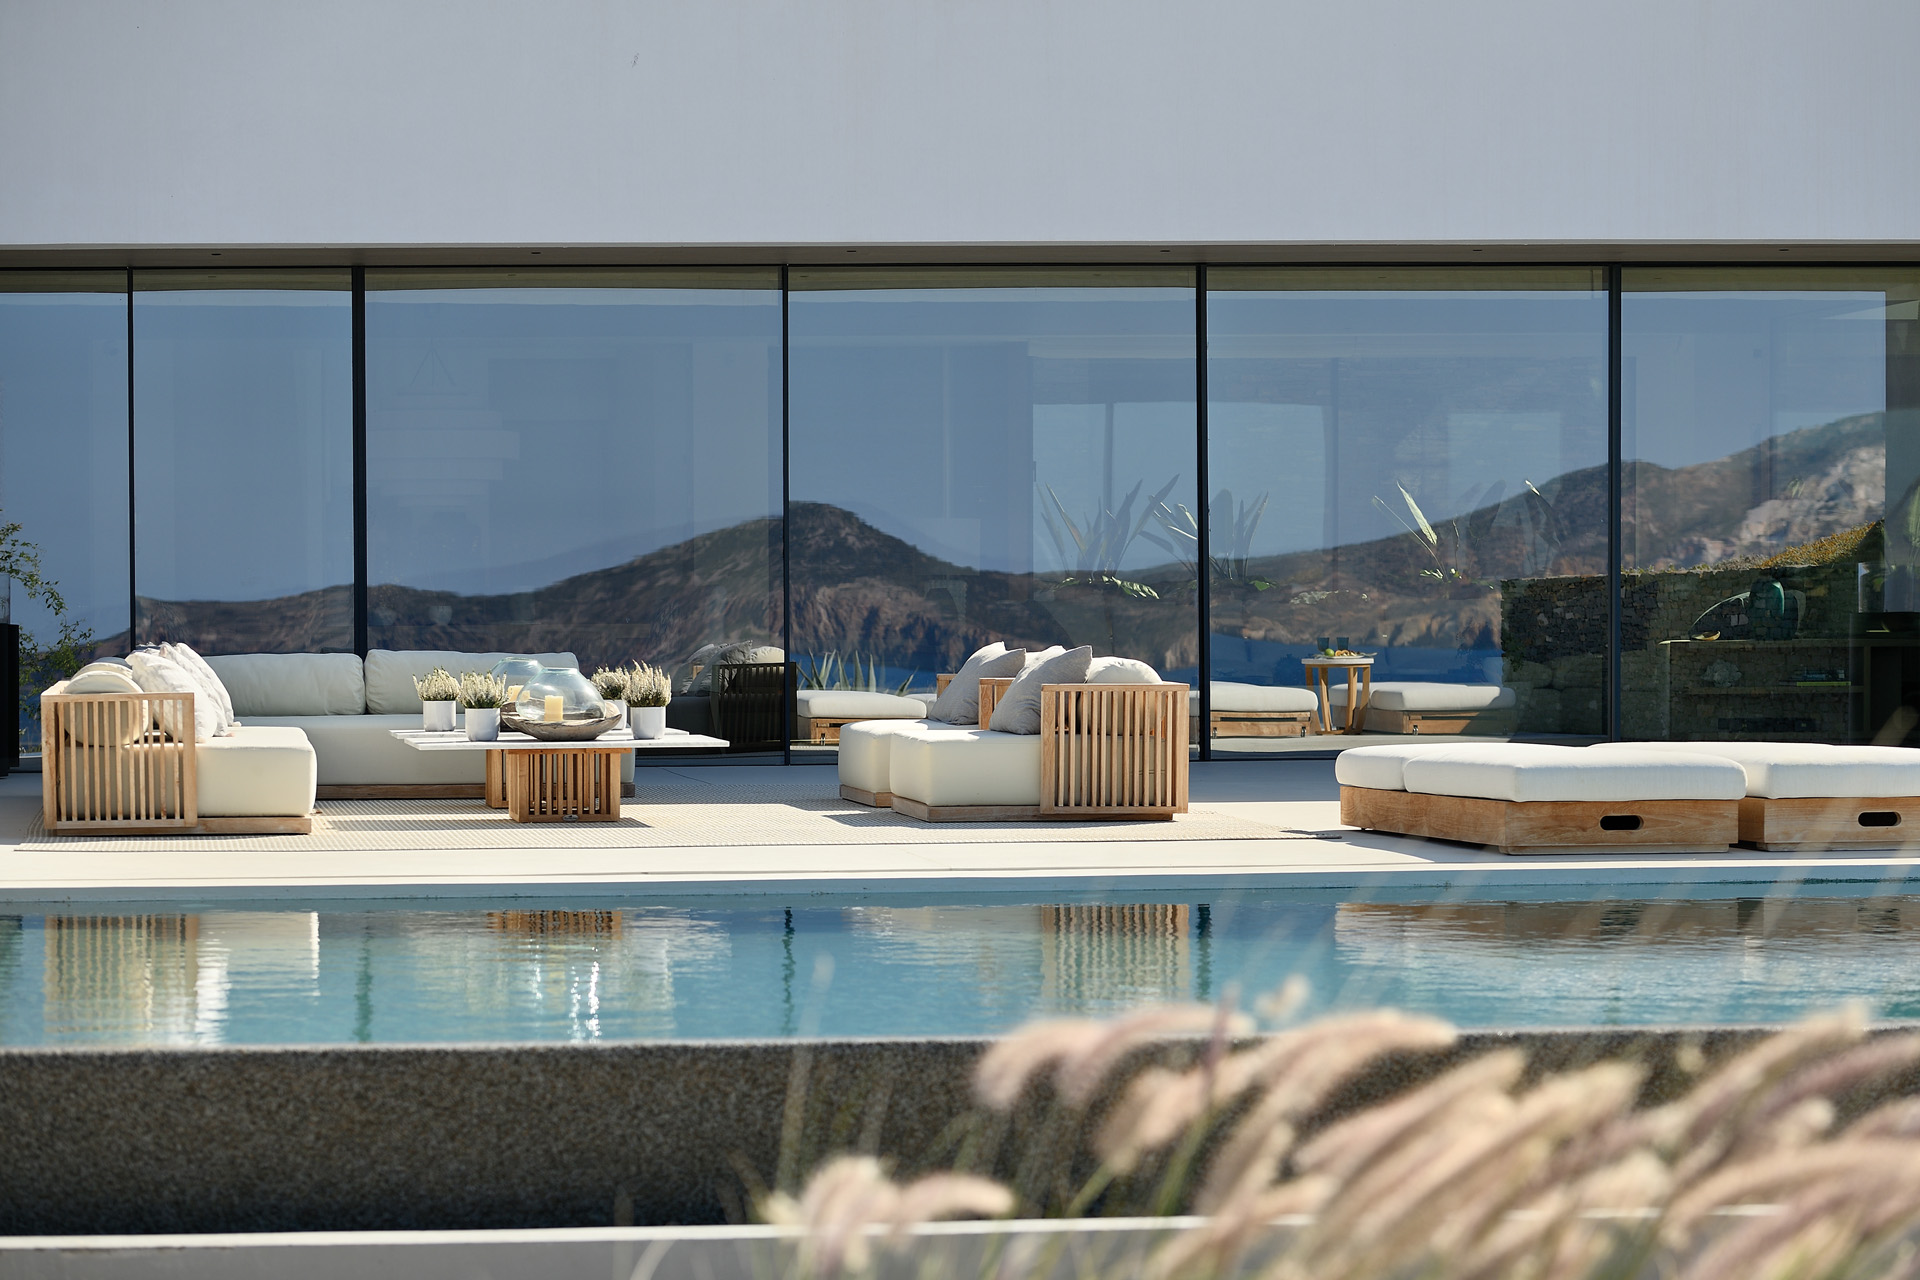 A luxury villa with a large glass wall overlooking the sea and mountains beyond